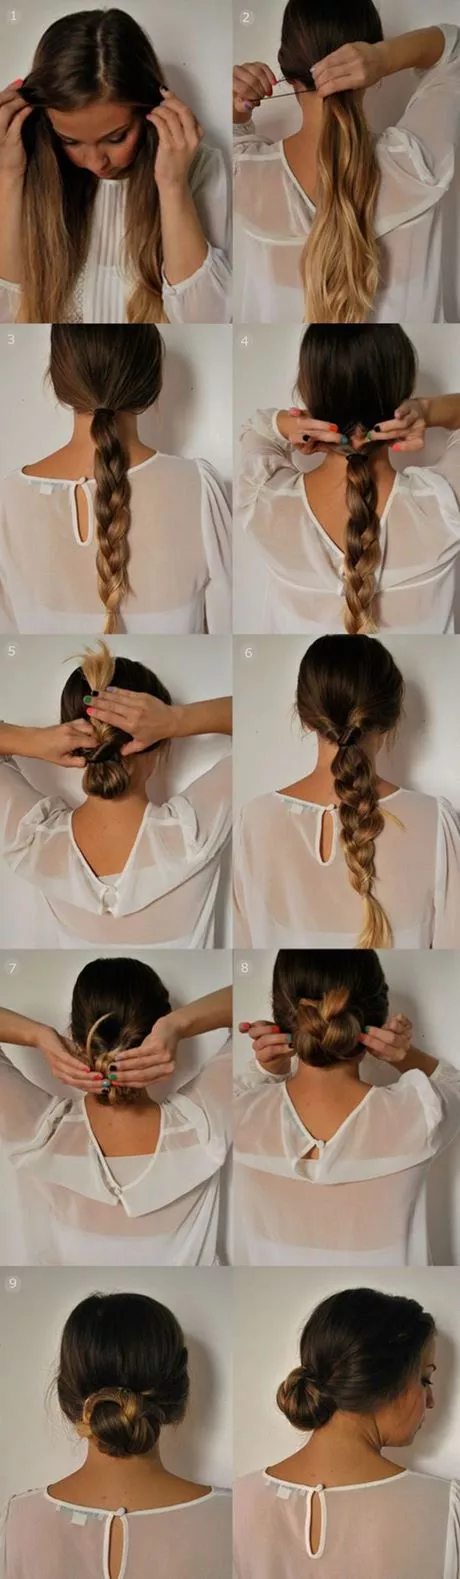 Quick and easy hairstyles for girls quick-and-easy-hairstyles-for-girls-50_12-5-5